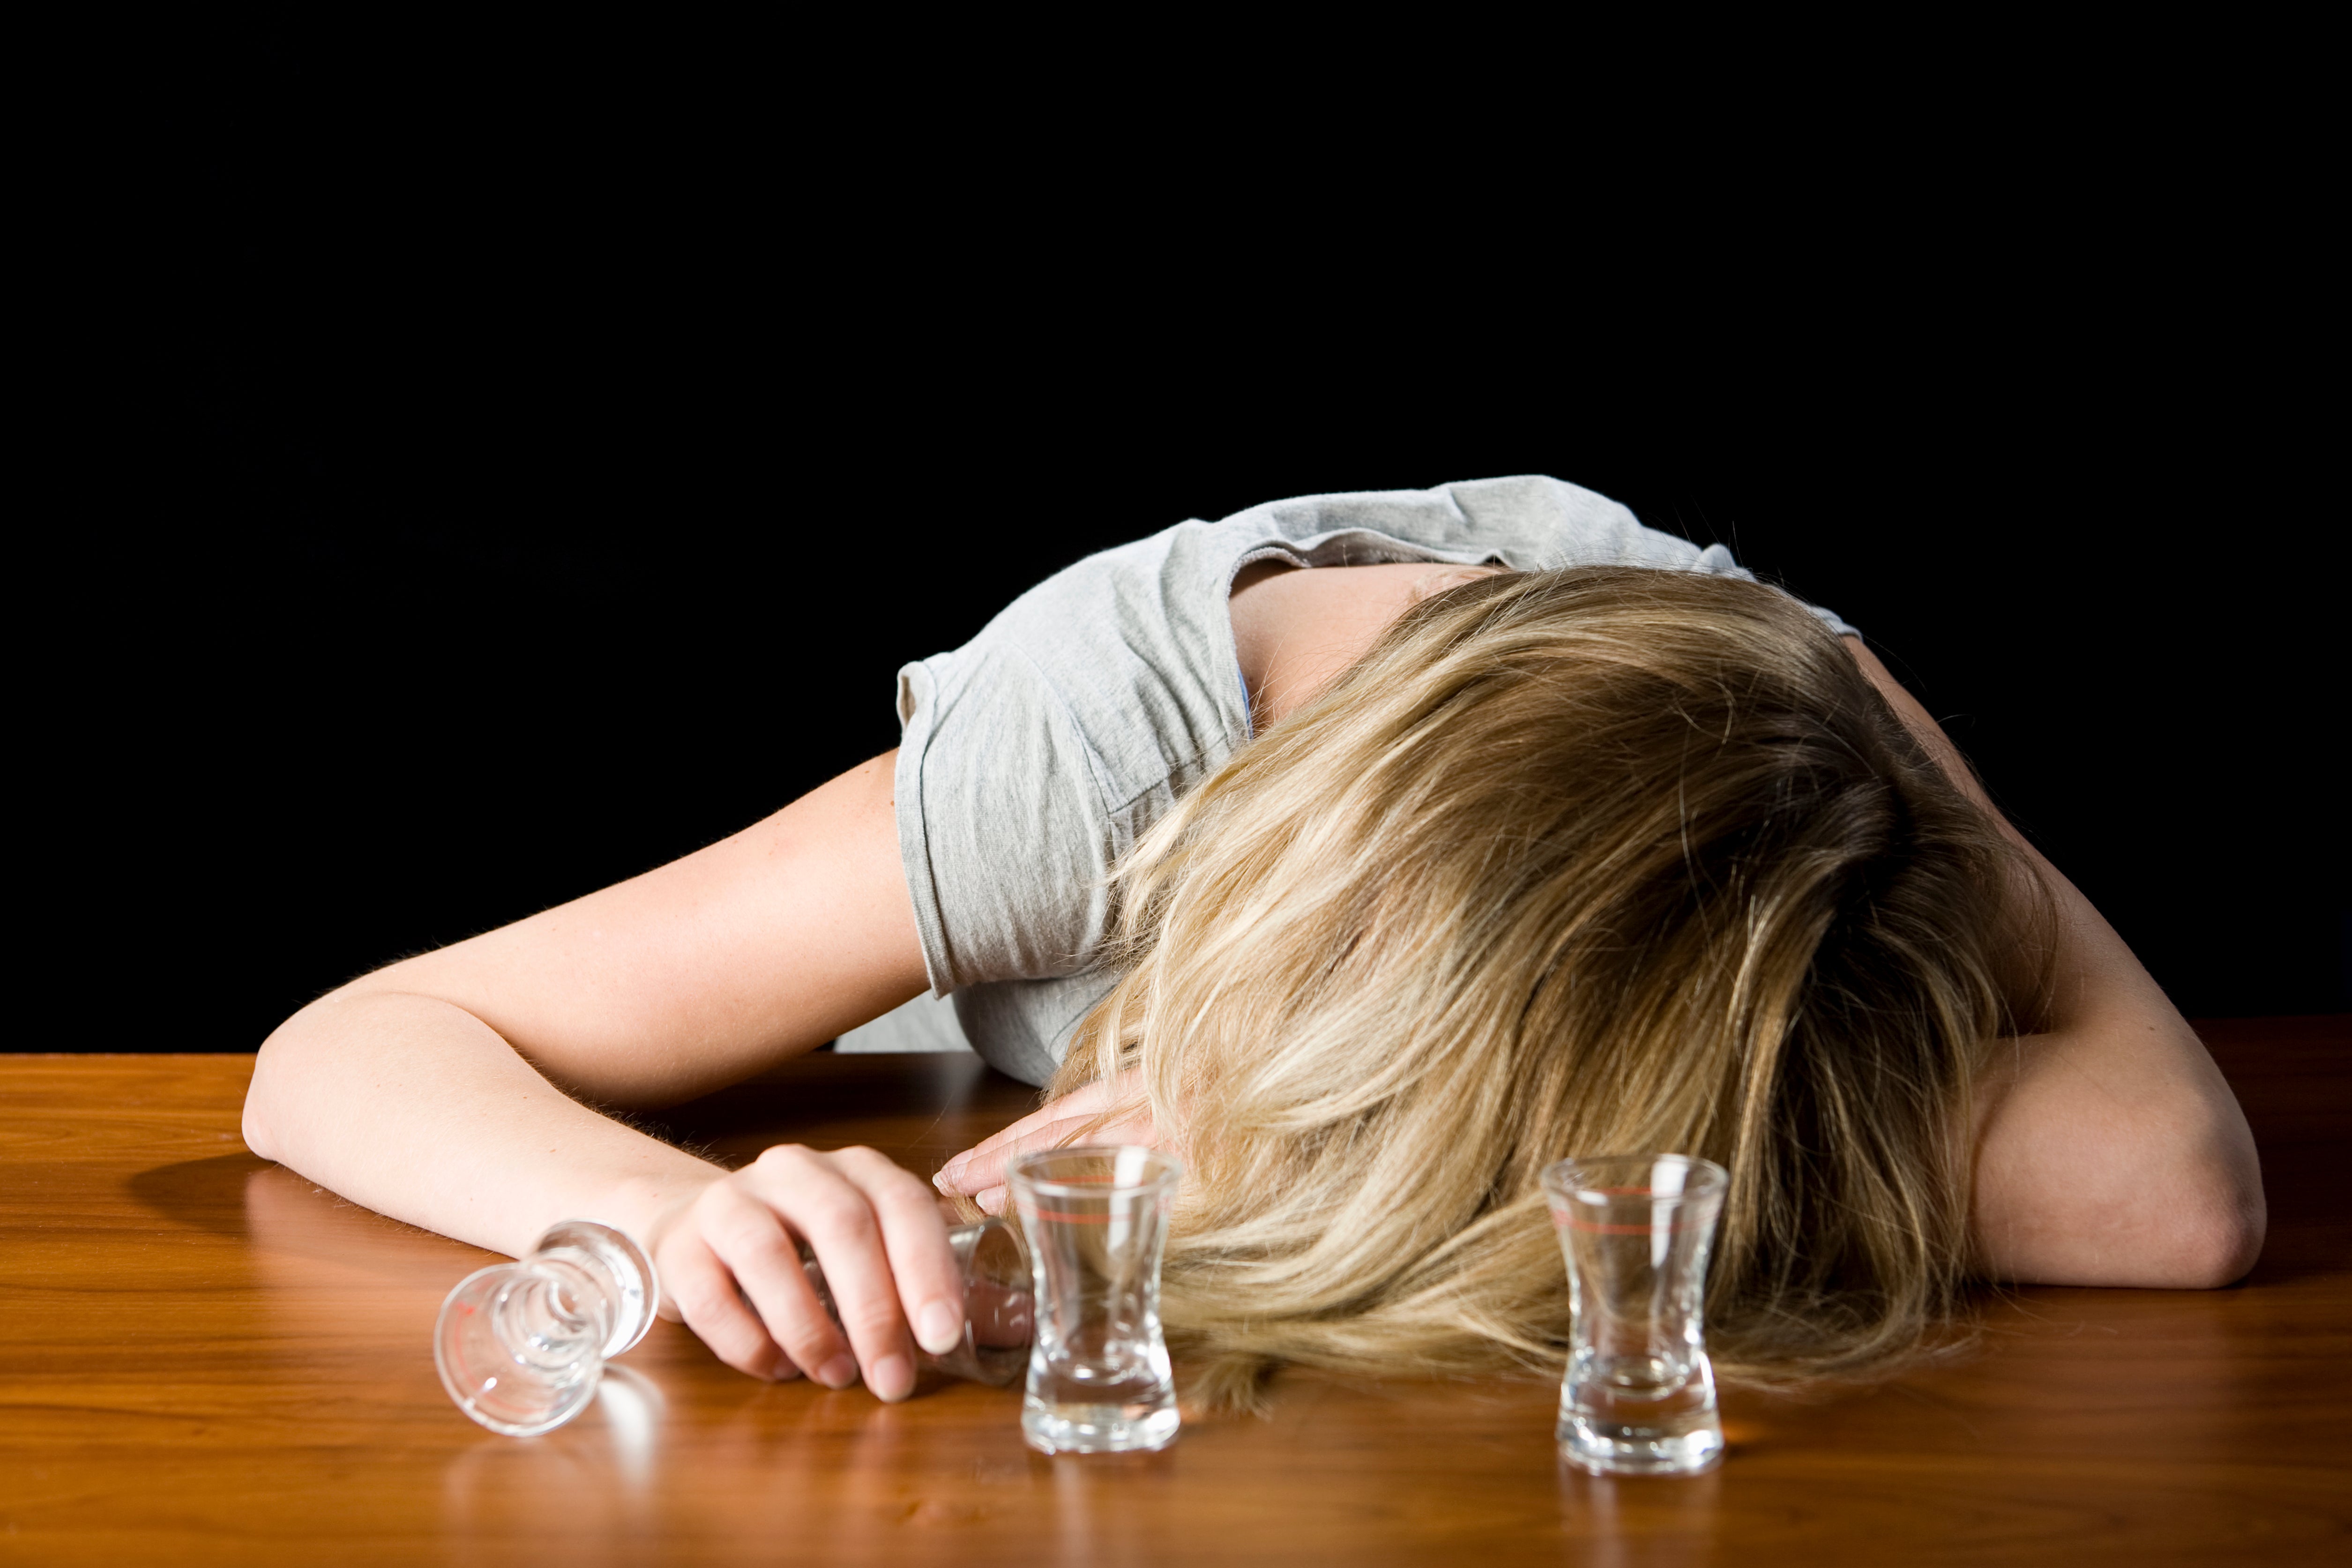 What Causes Alcohol-Induced Blackouts? – Scientific American